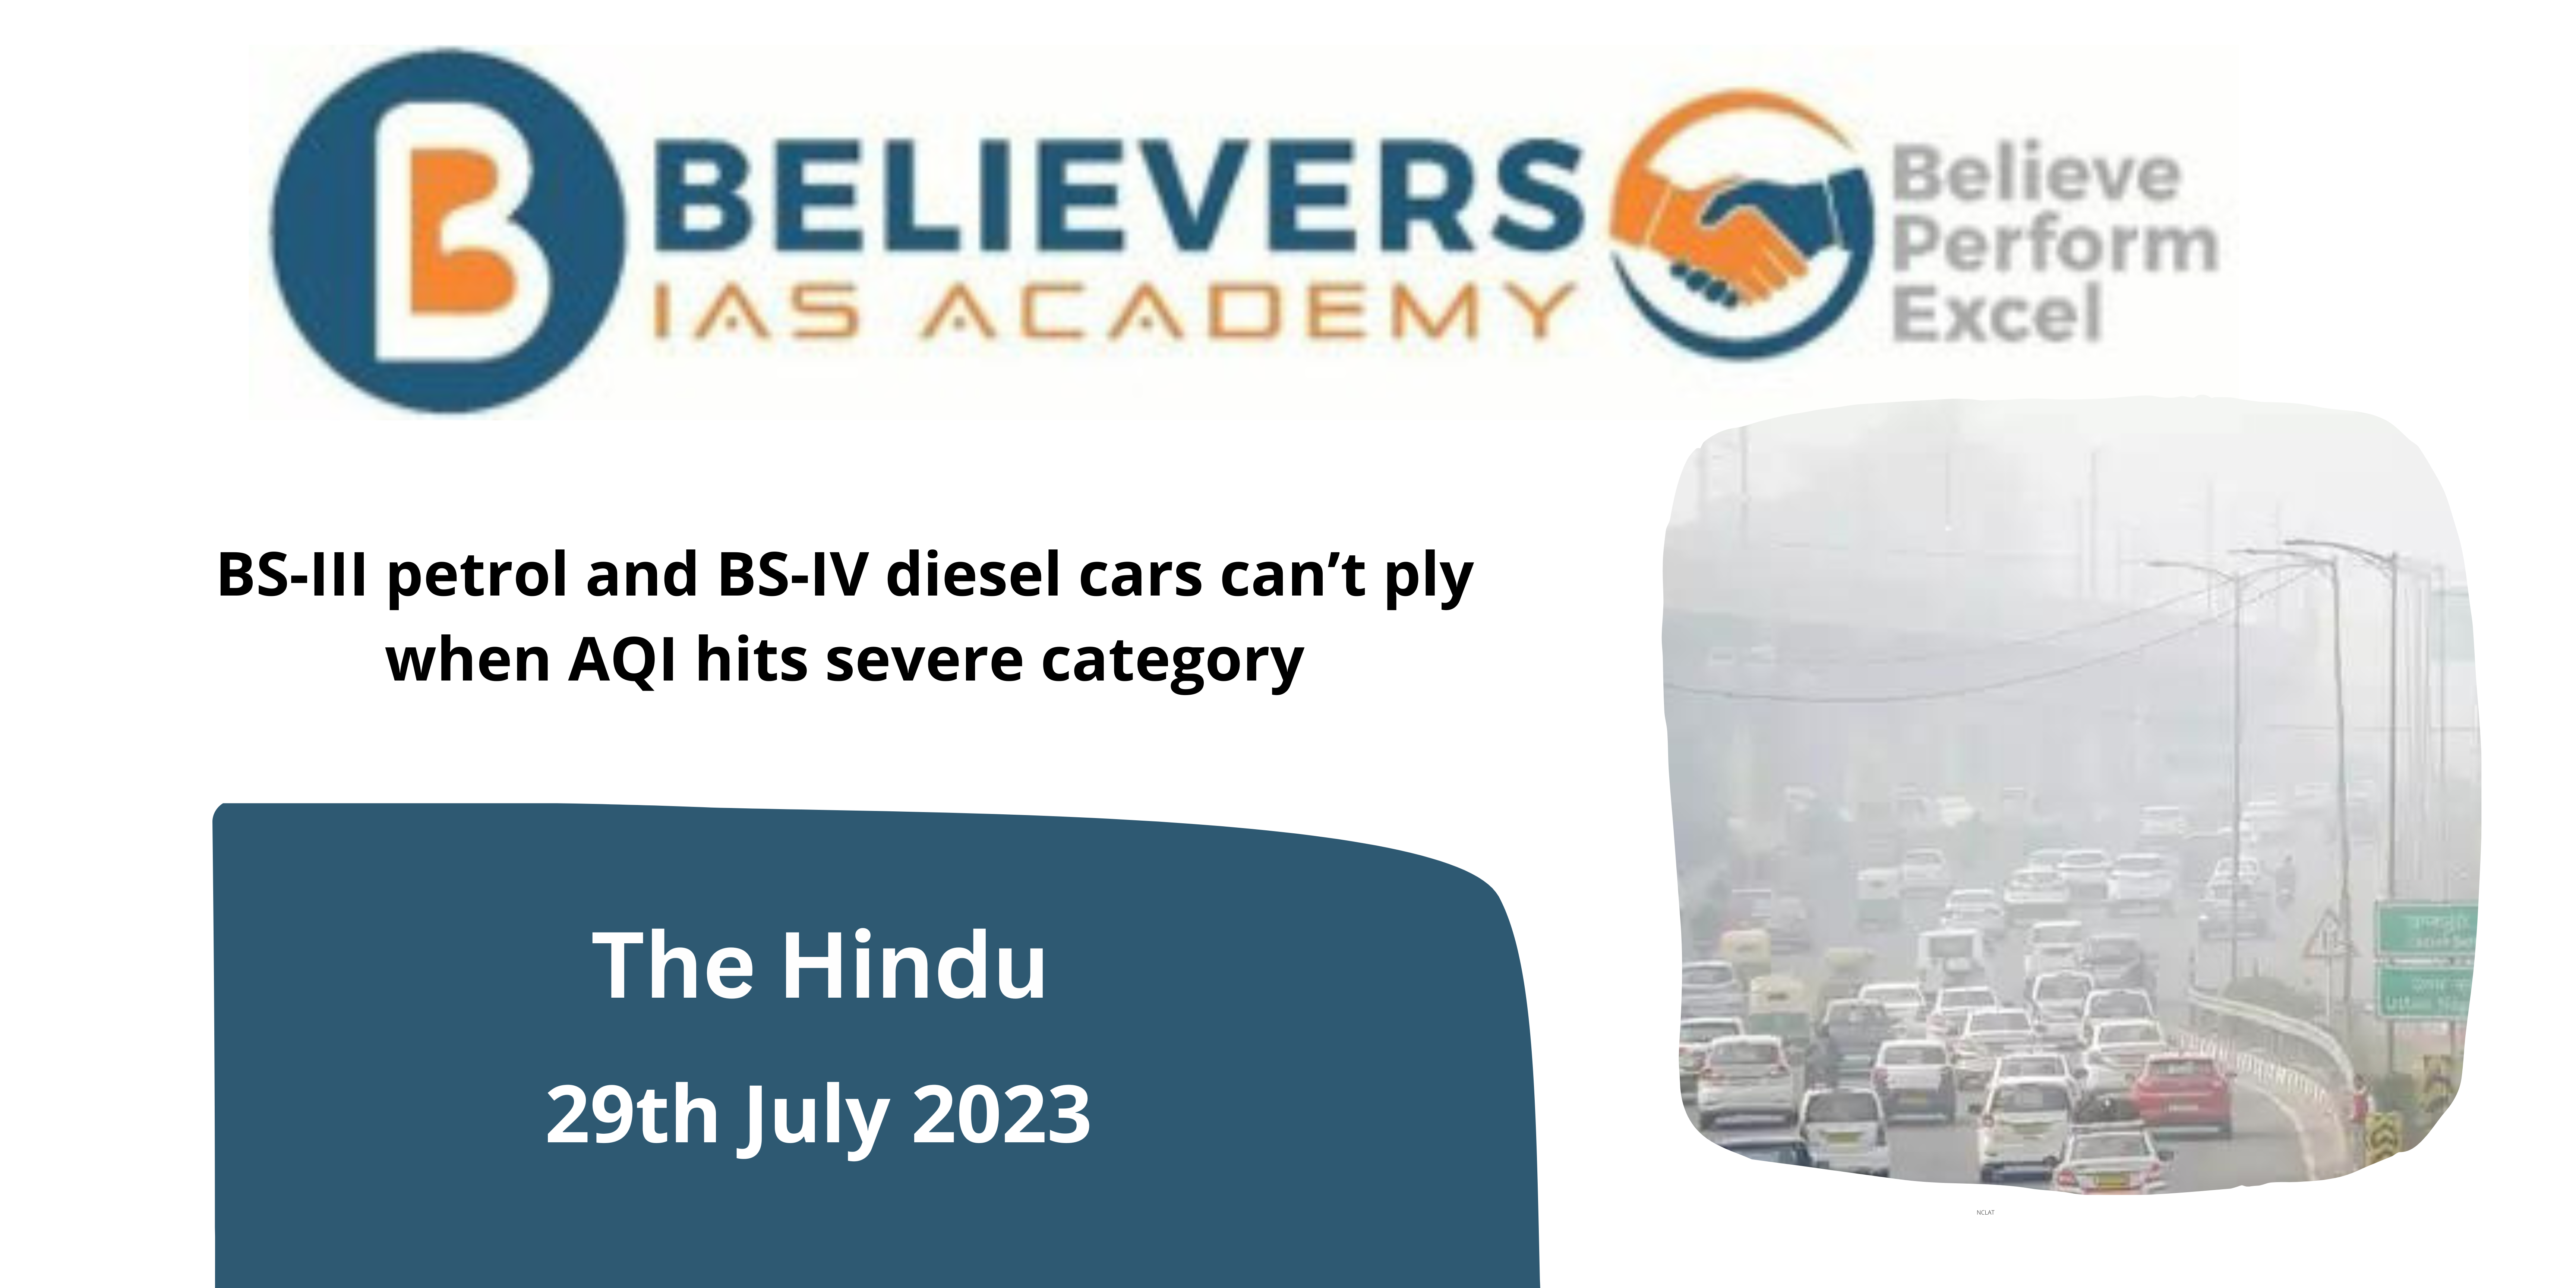 BS-III petrol and BS-IV diesel cars can’t ply when AQI hits severe category